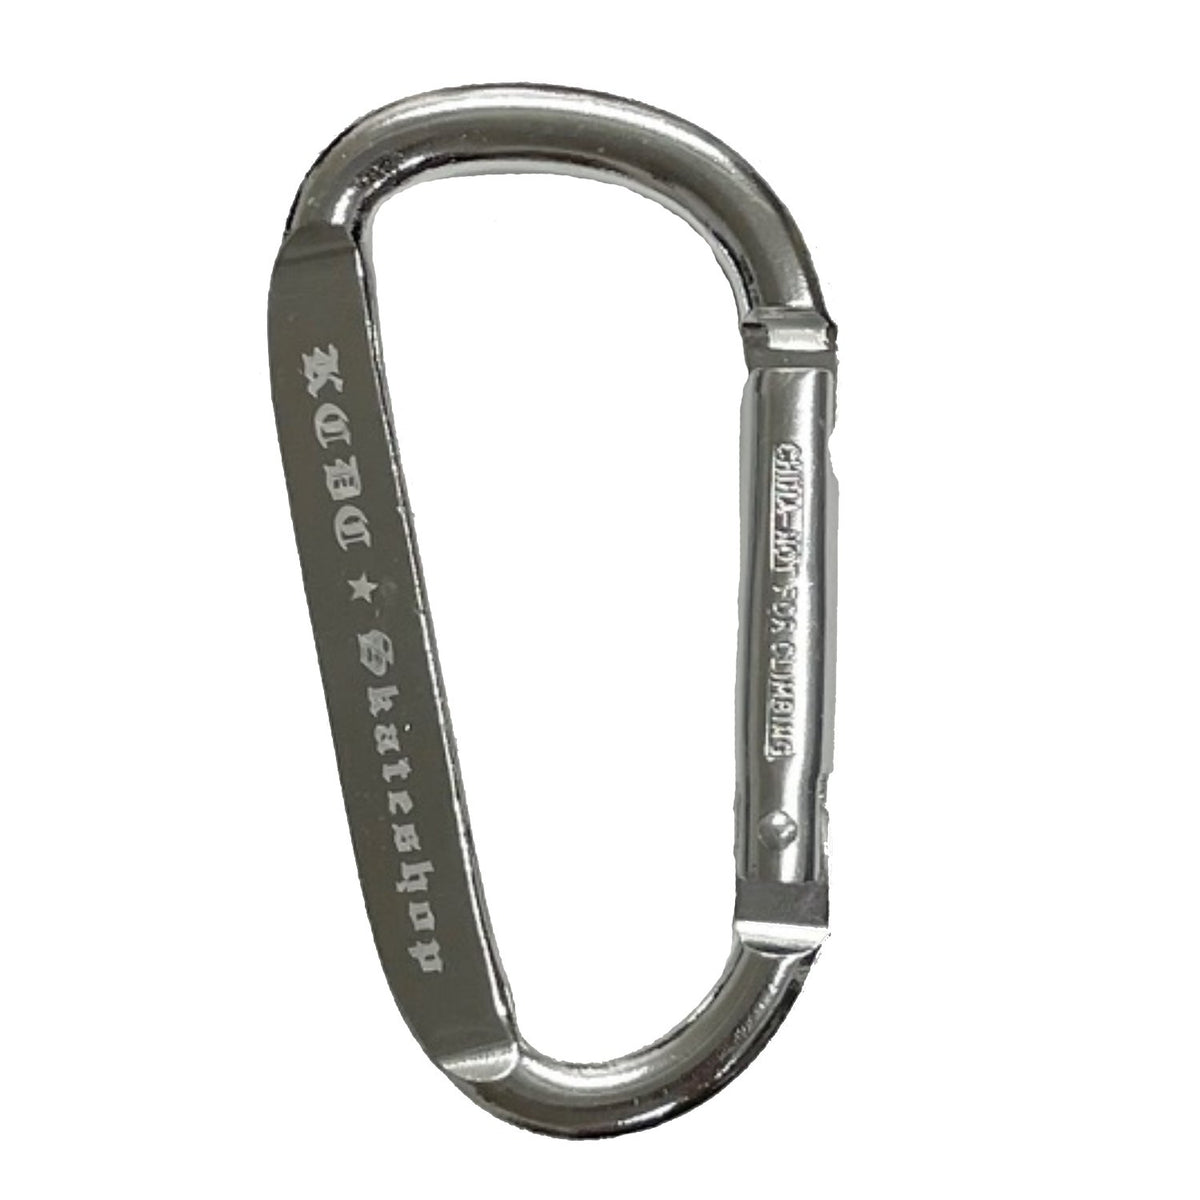 80mm Custom KCDC Skateshop Carabiner Silver Not for Climbing Accessory